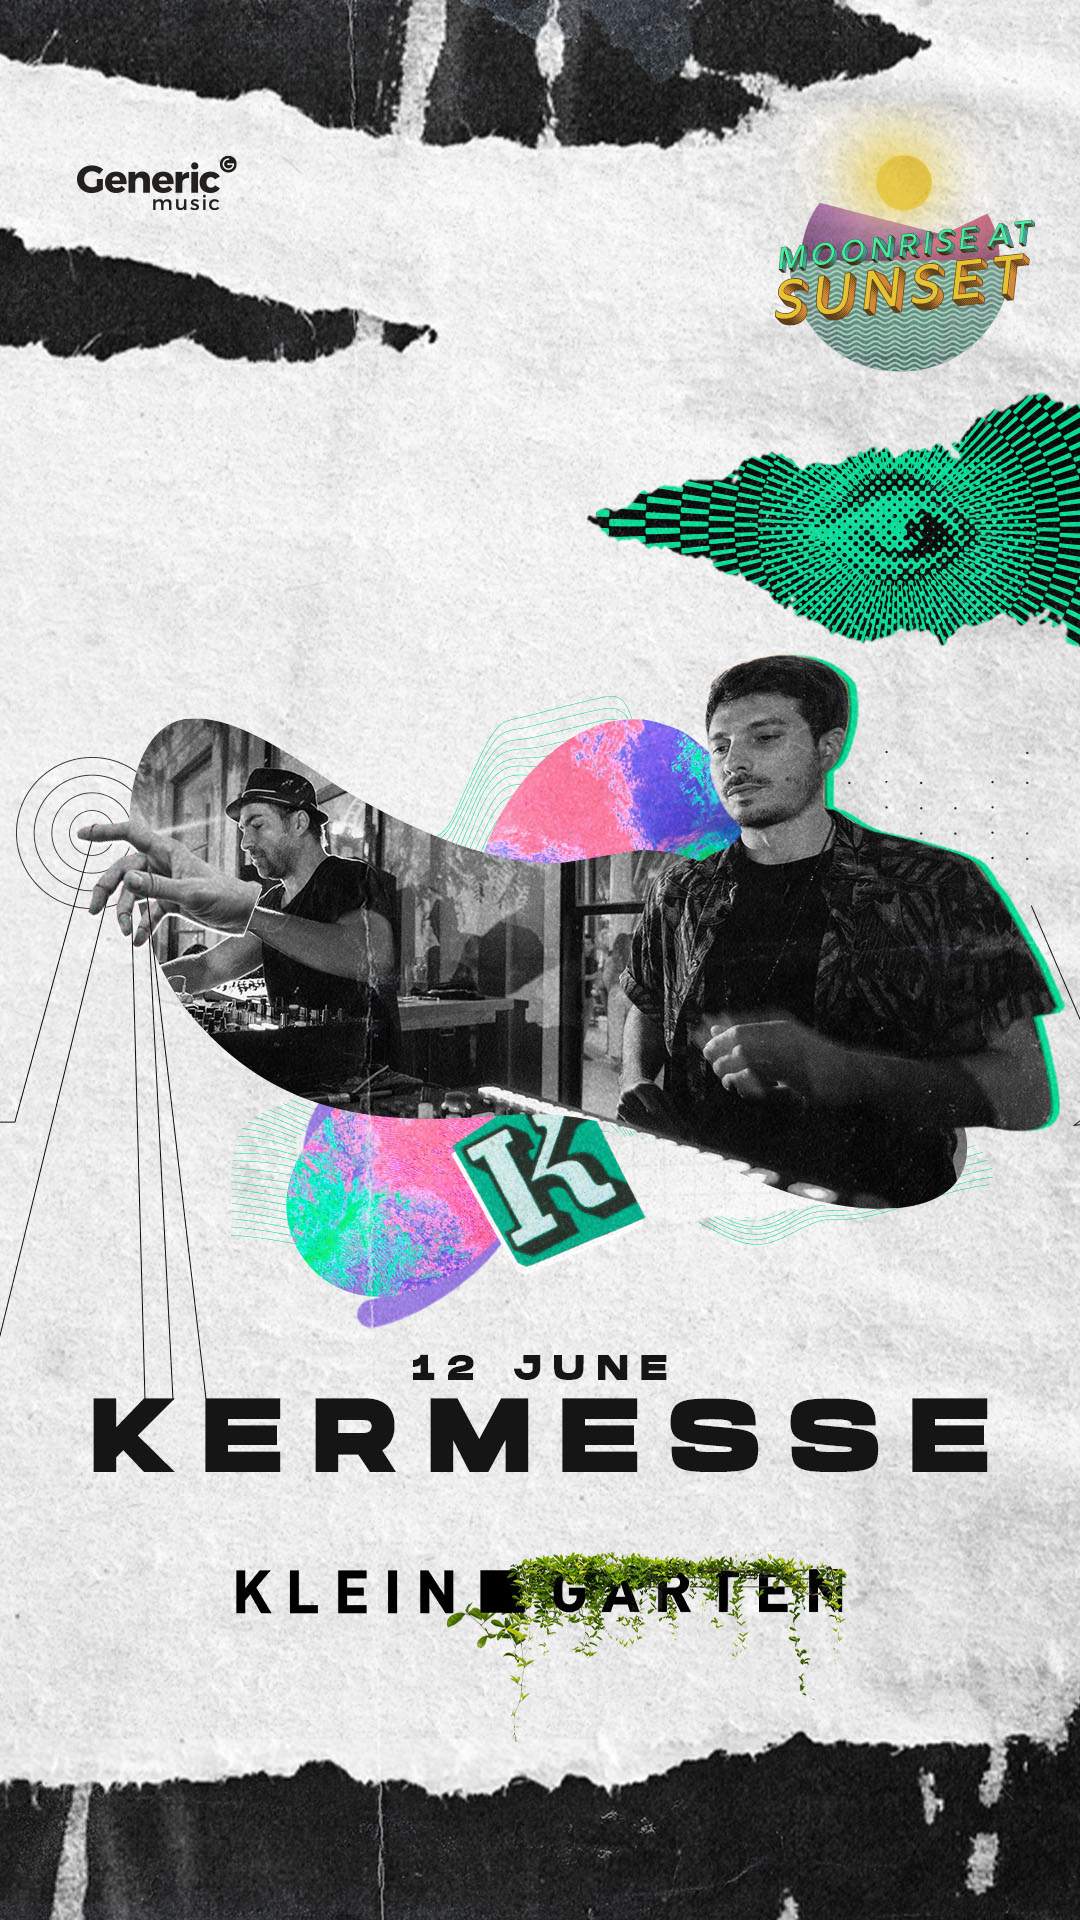 Moonrise at Sunset with Kermesse - フライヤー裏